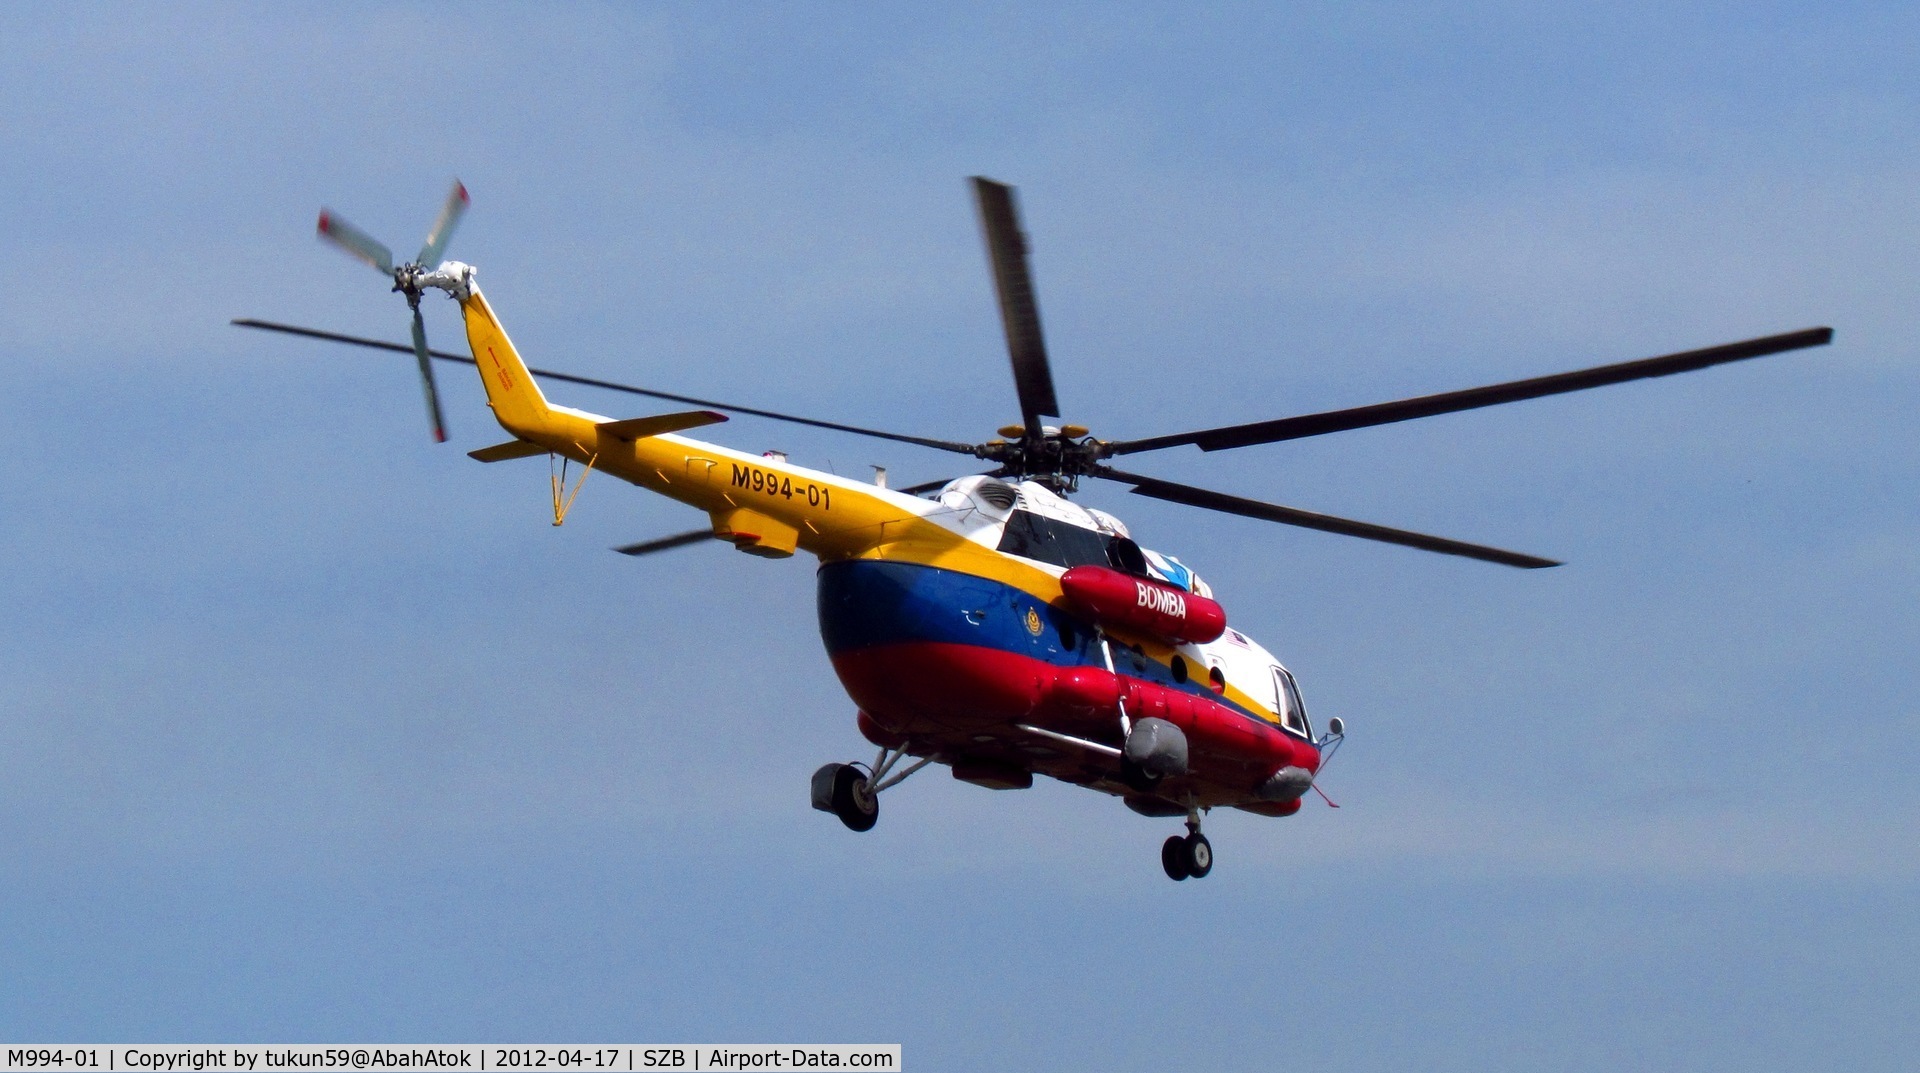 M994-01, Mil Mi-17-1V Hip C/N 458M01, Malaysian Fire and Rescue Dept (BOMBA)